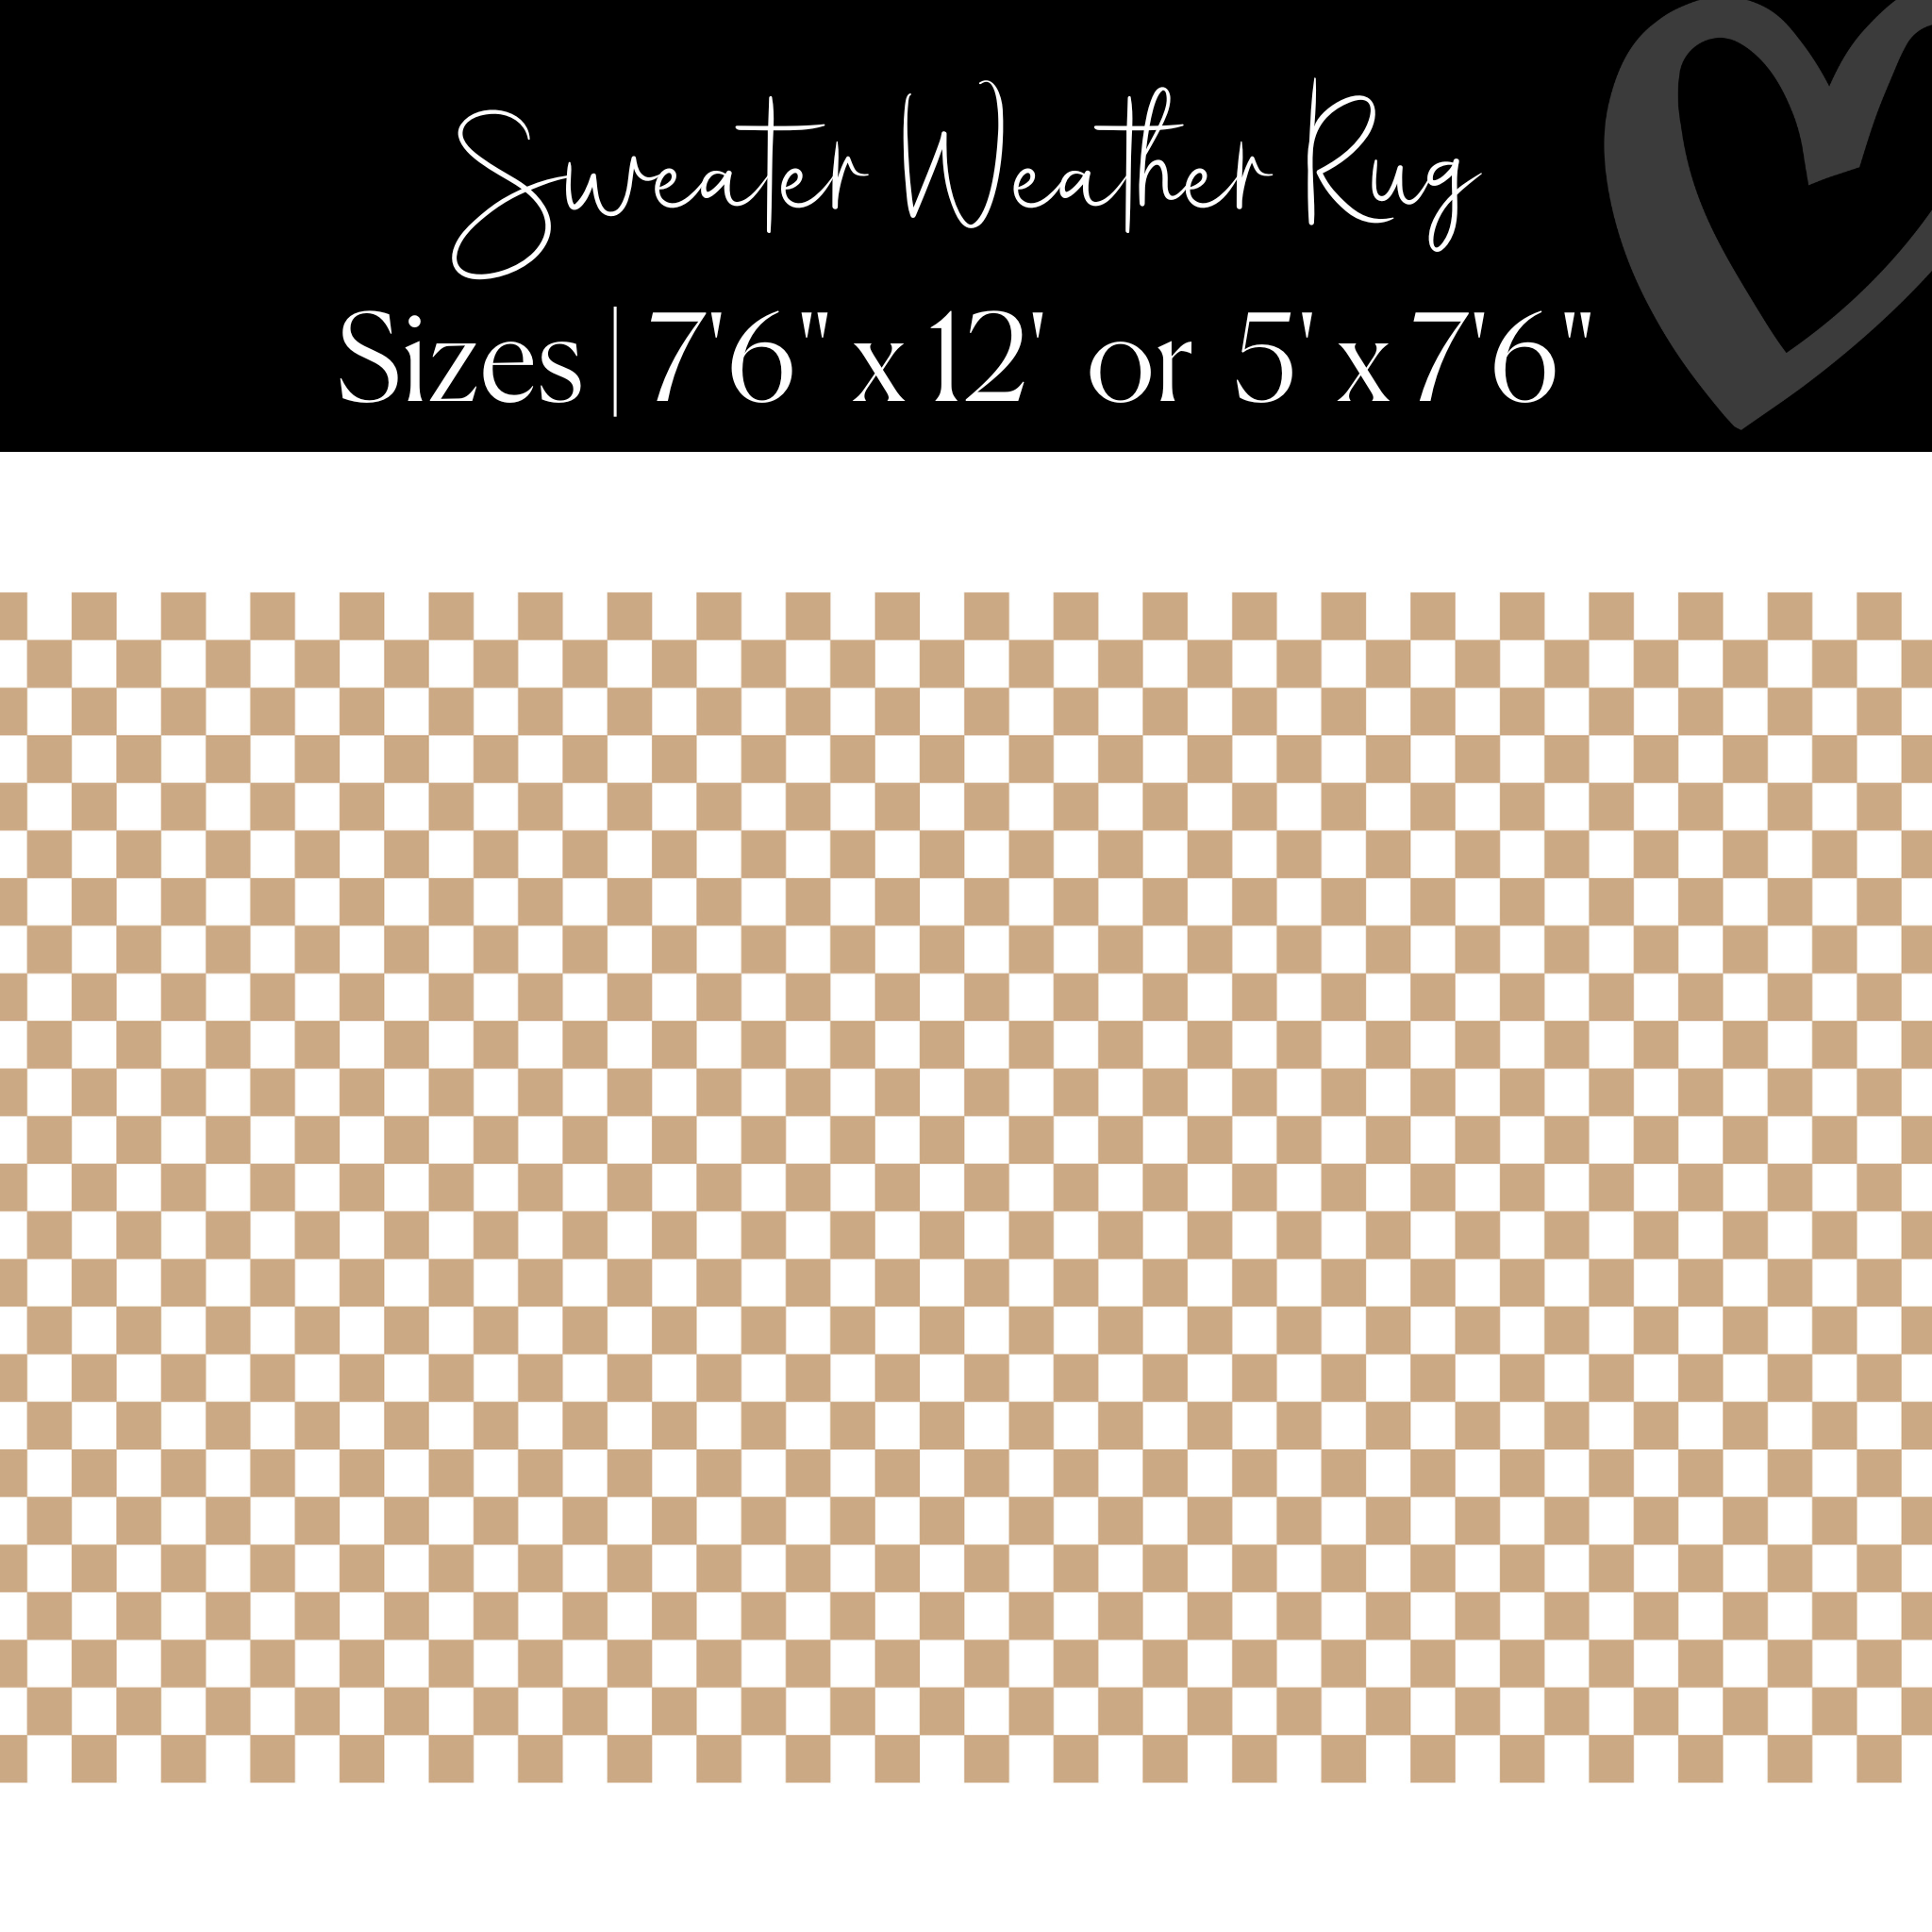 Brown and White Checkerboard Rug | Neutral Classroom Rug | Sweater Weather | Schoolgirl Style